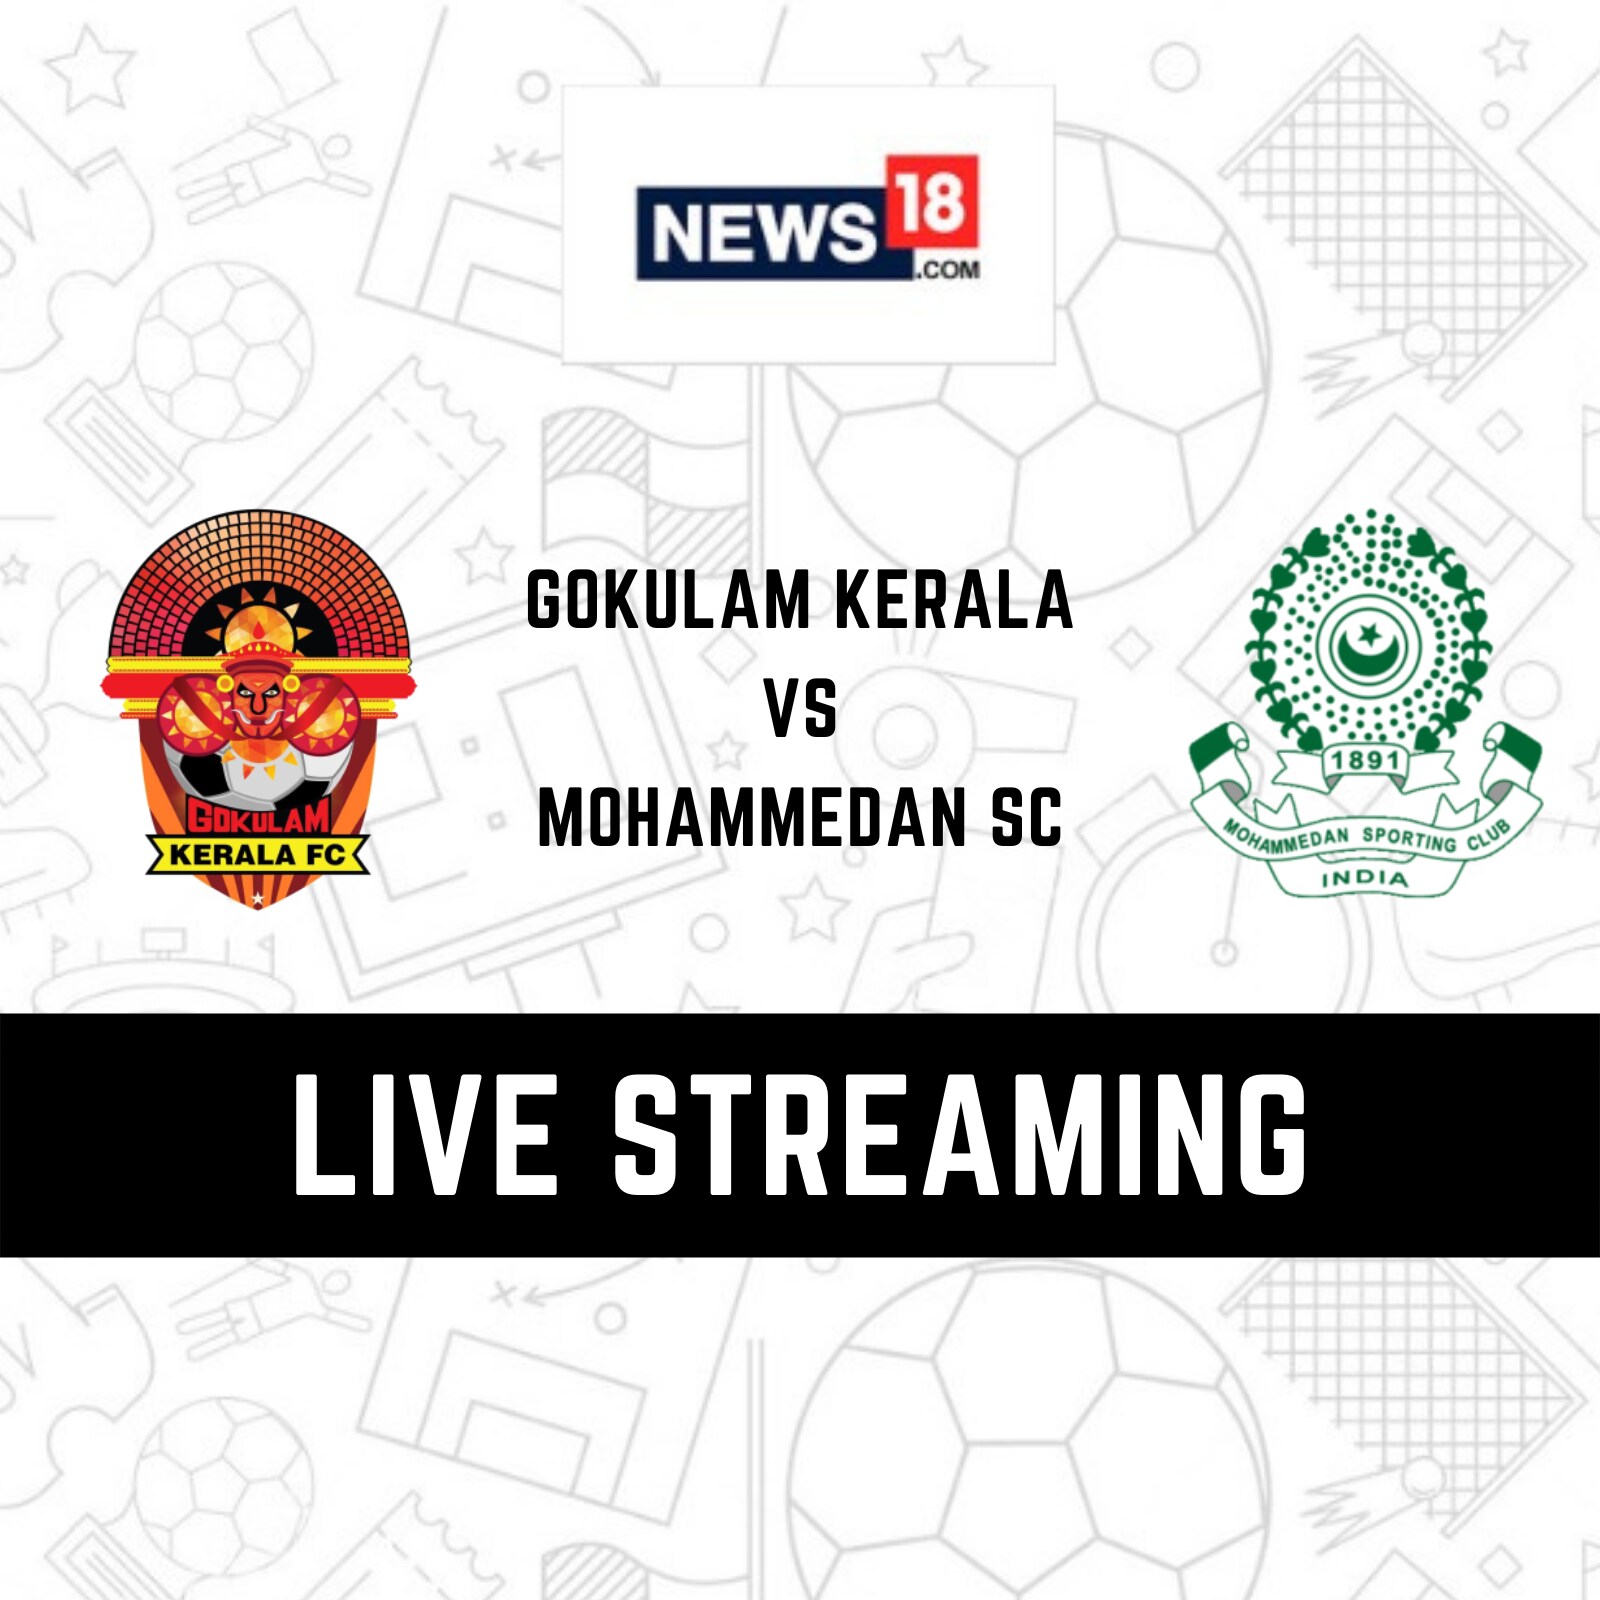 Gokulam Kerala vs Mohammedan SC Live Streaming When and Where to Watch I- League 2022-23 Live Coverage on Live TV Online